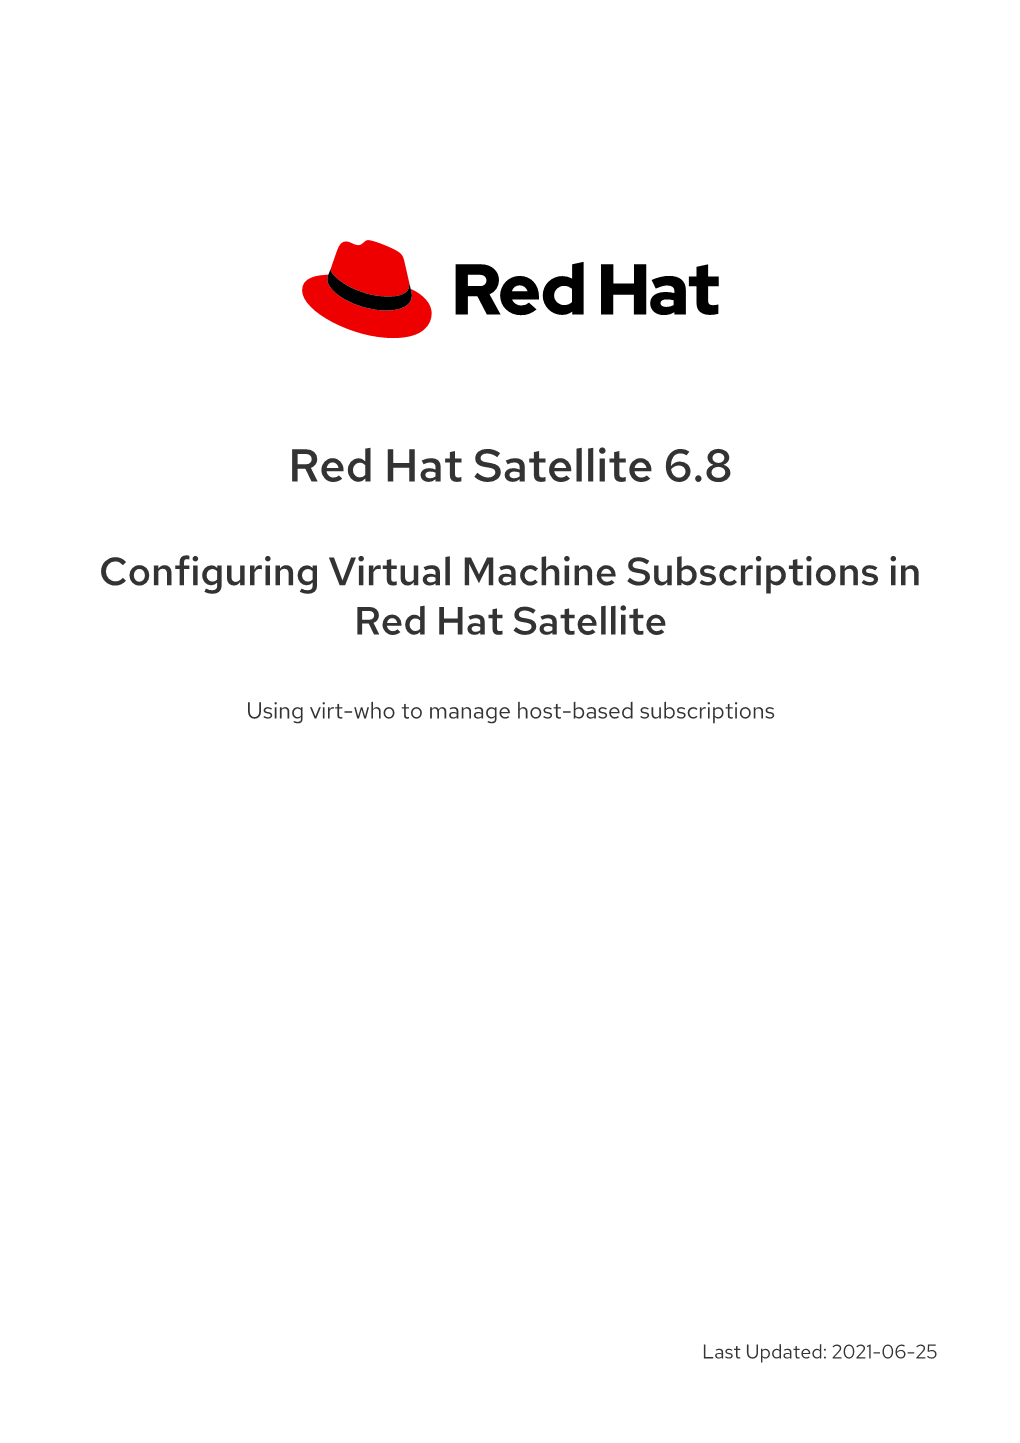 Red Hat Satellite 6.8 Configuring Virtual Machine Subscriptions in Red Hat Satellite